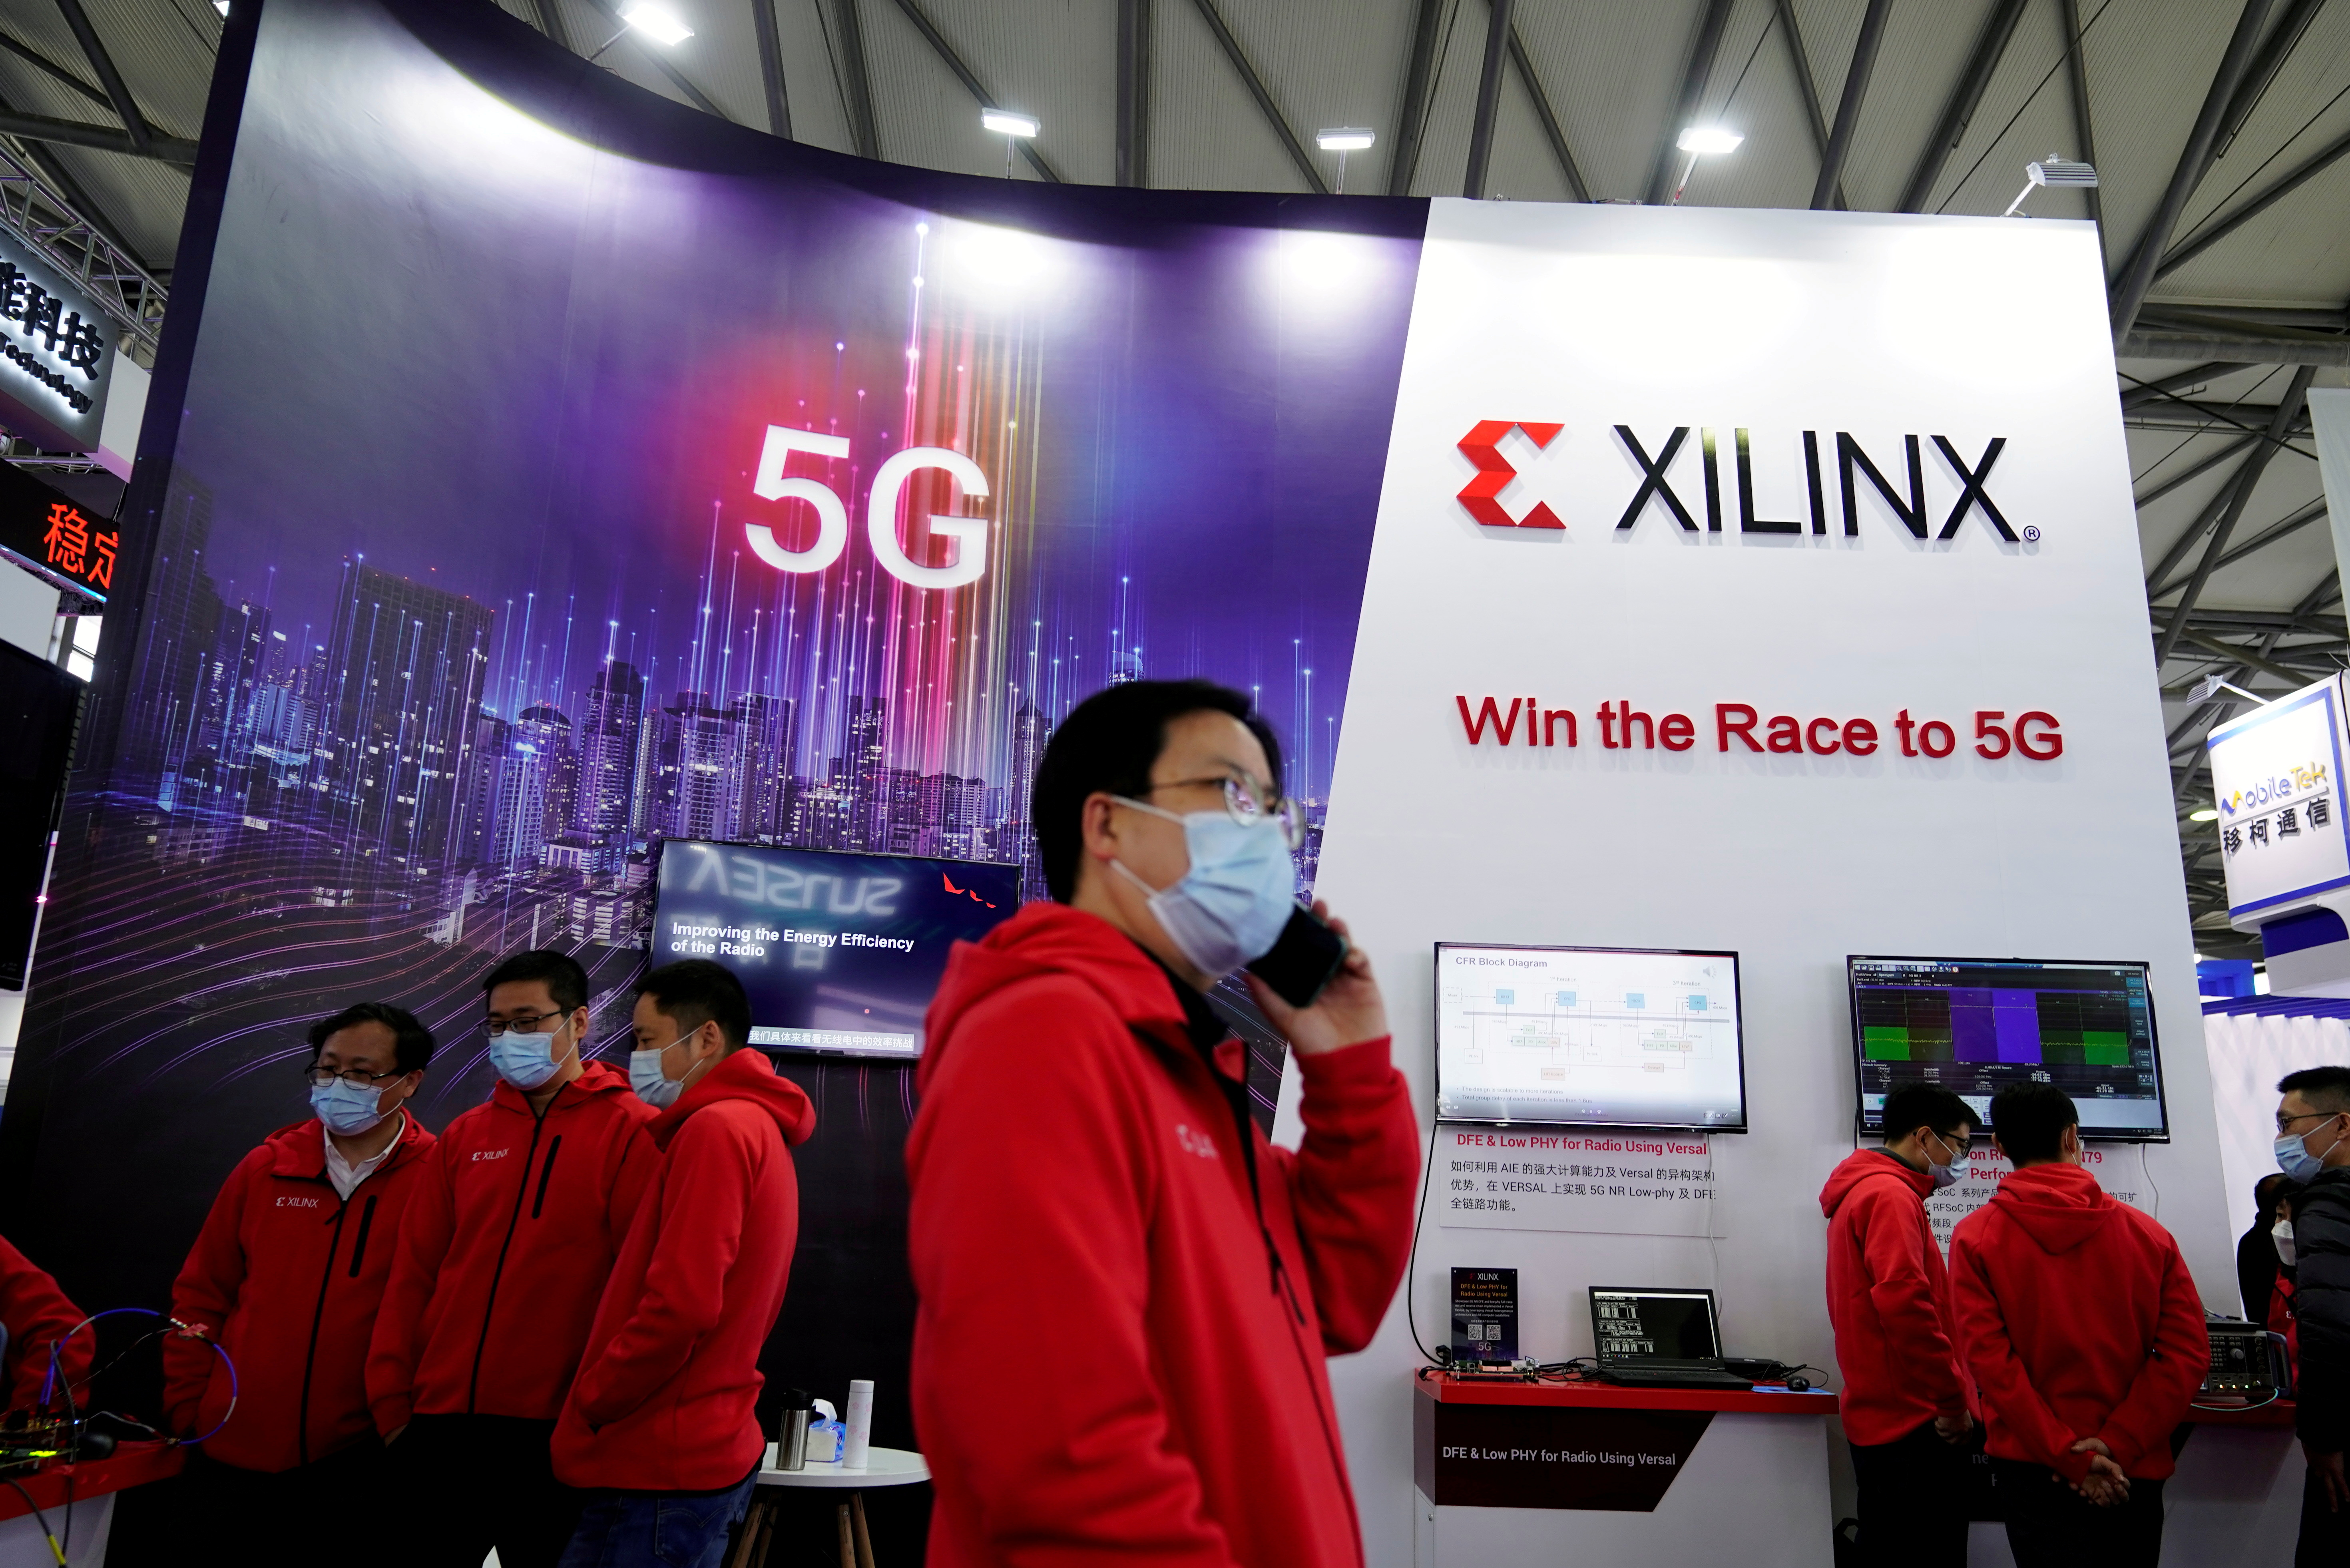 The Xilinx logo is seen at an event in Shanghai